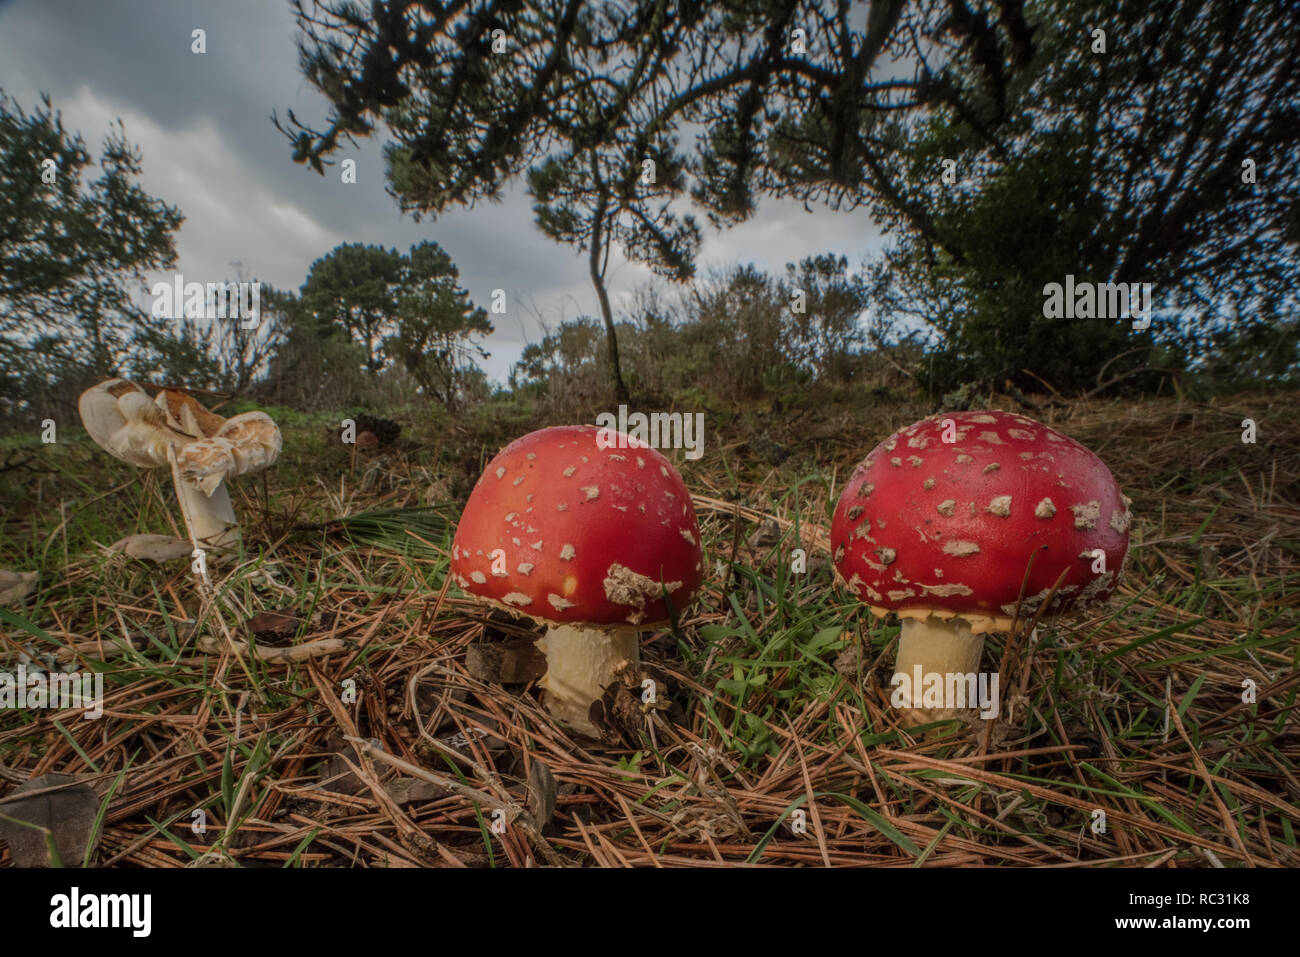 Fly agaric mushrooms (Amanita muscaria) a poisonous toadstool species found across much of the world. Growing wild in a regional park in California. Stock Photo